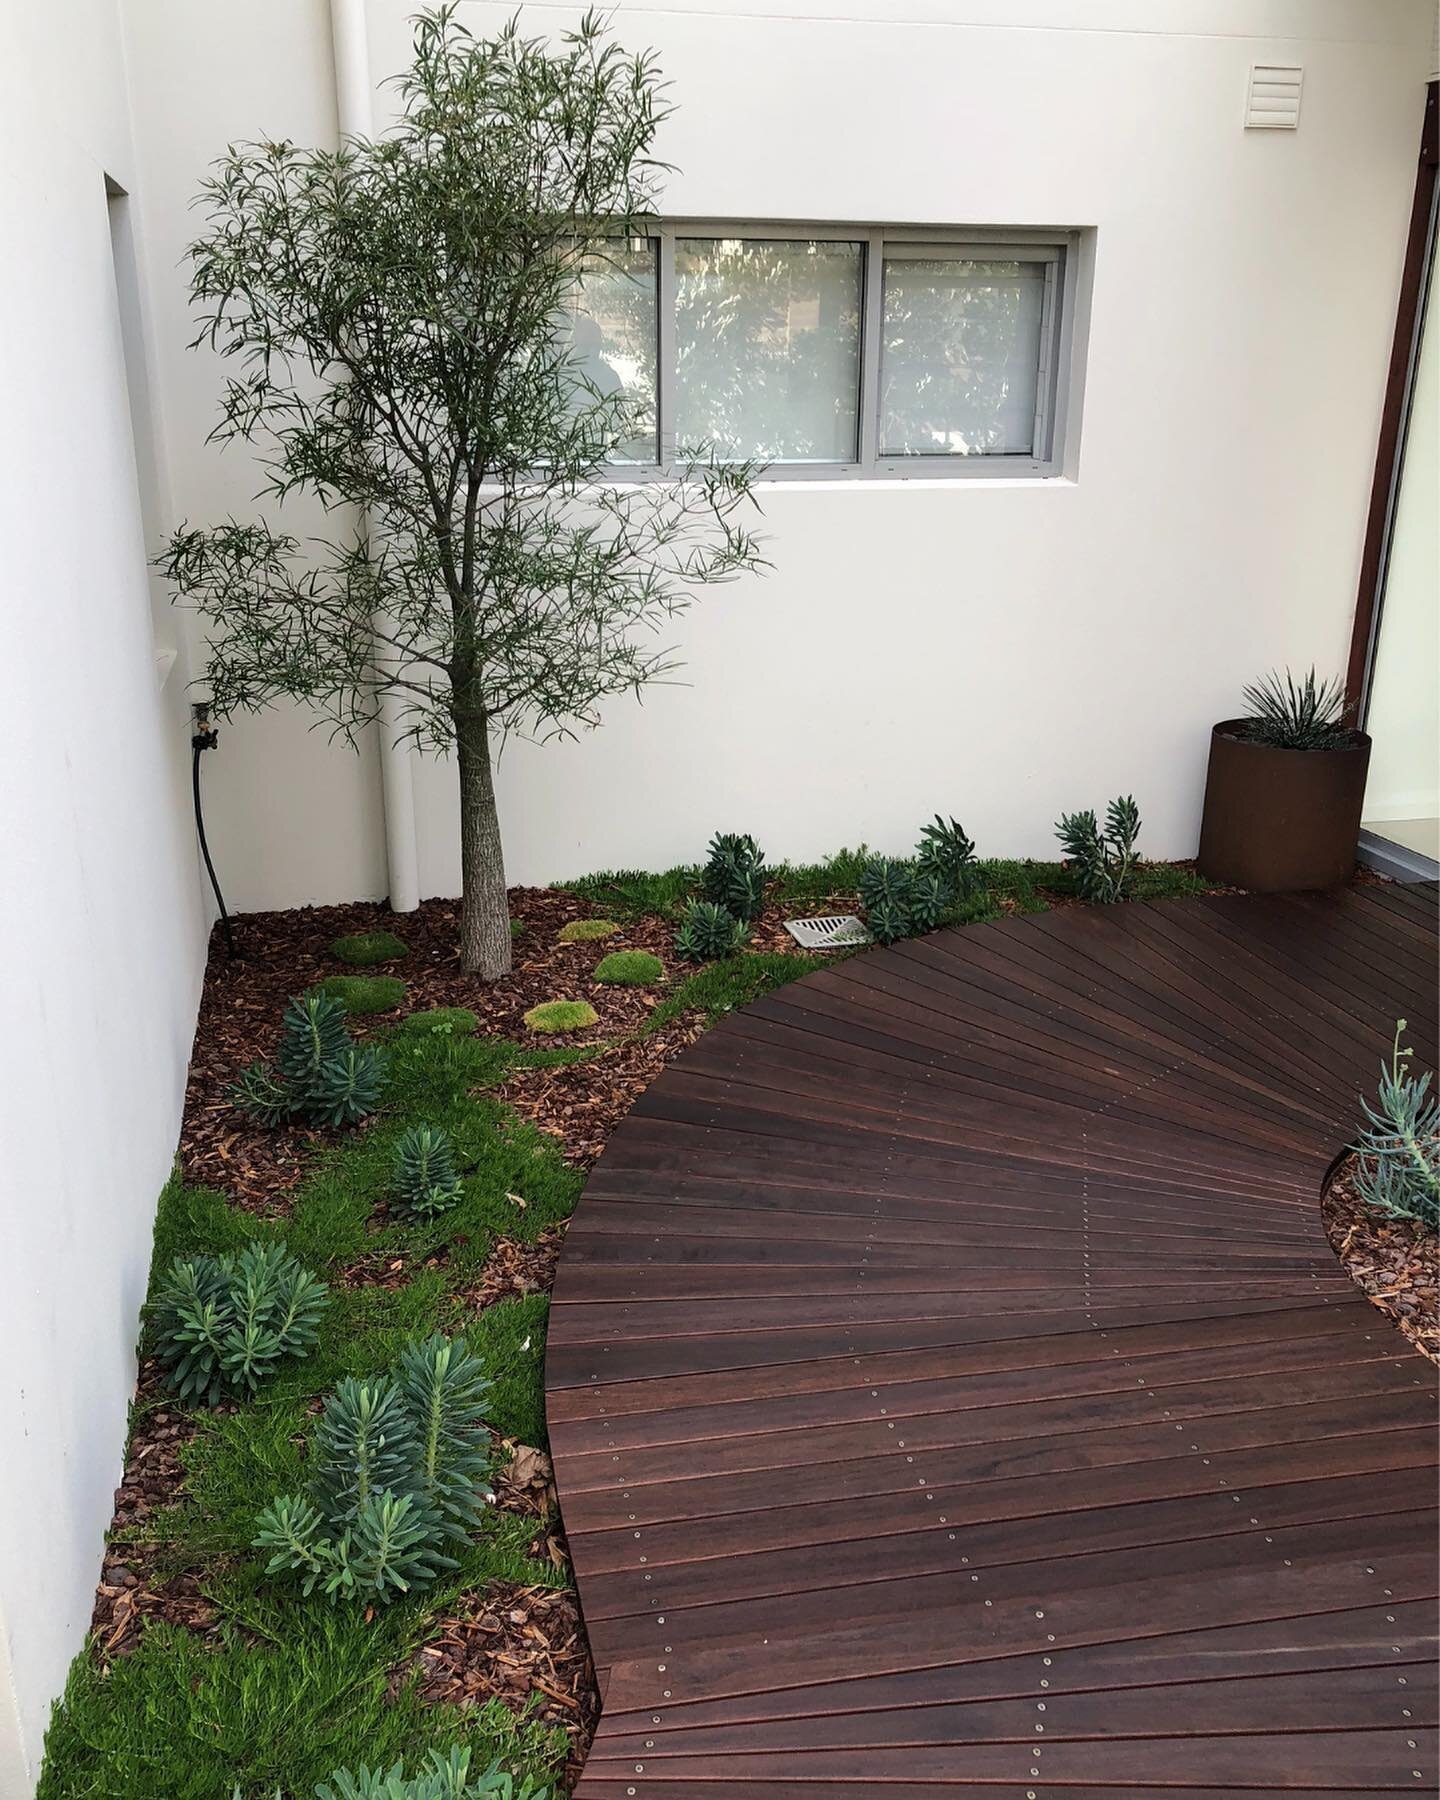 Front Entrance Renovation | Newport Beach | A complete re-designed of this front entrance garden to create a lovely sense of welcome into the home. 🏡💚

Featuring a Bottle Tree with low lying Casuarina Cousins, Mediterranean Spurge and native grasse